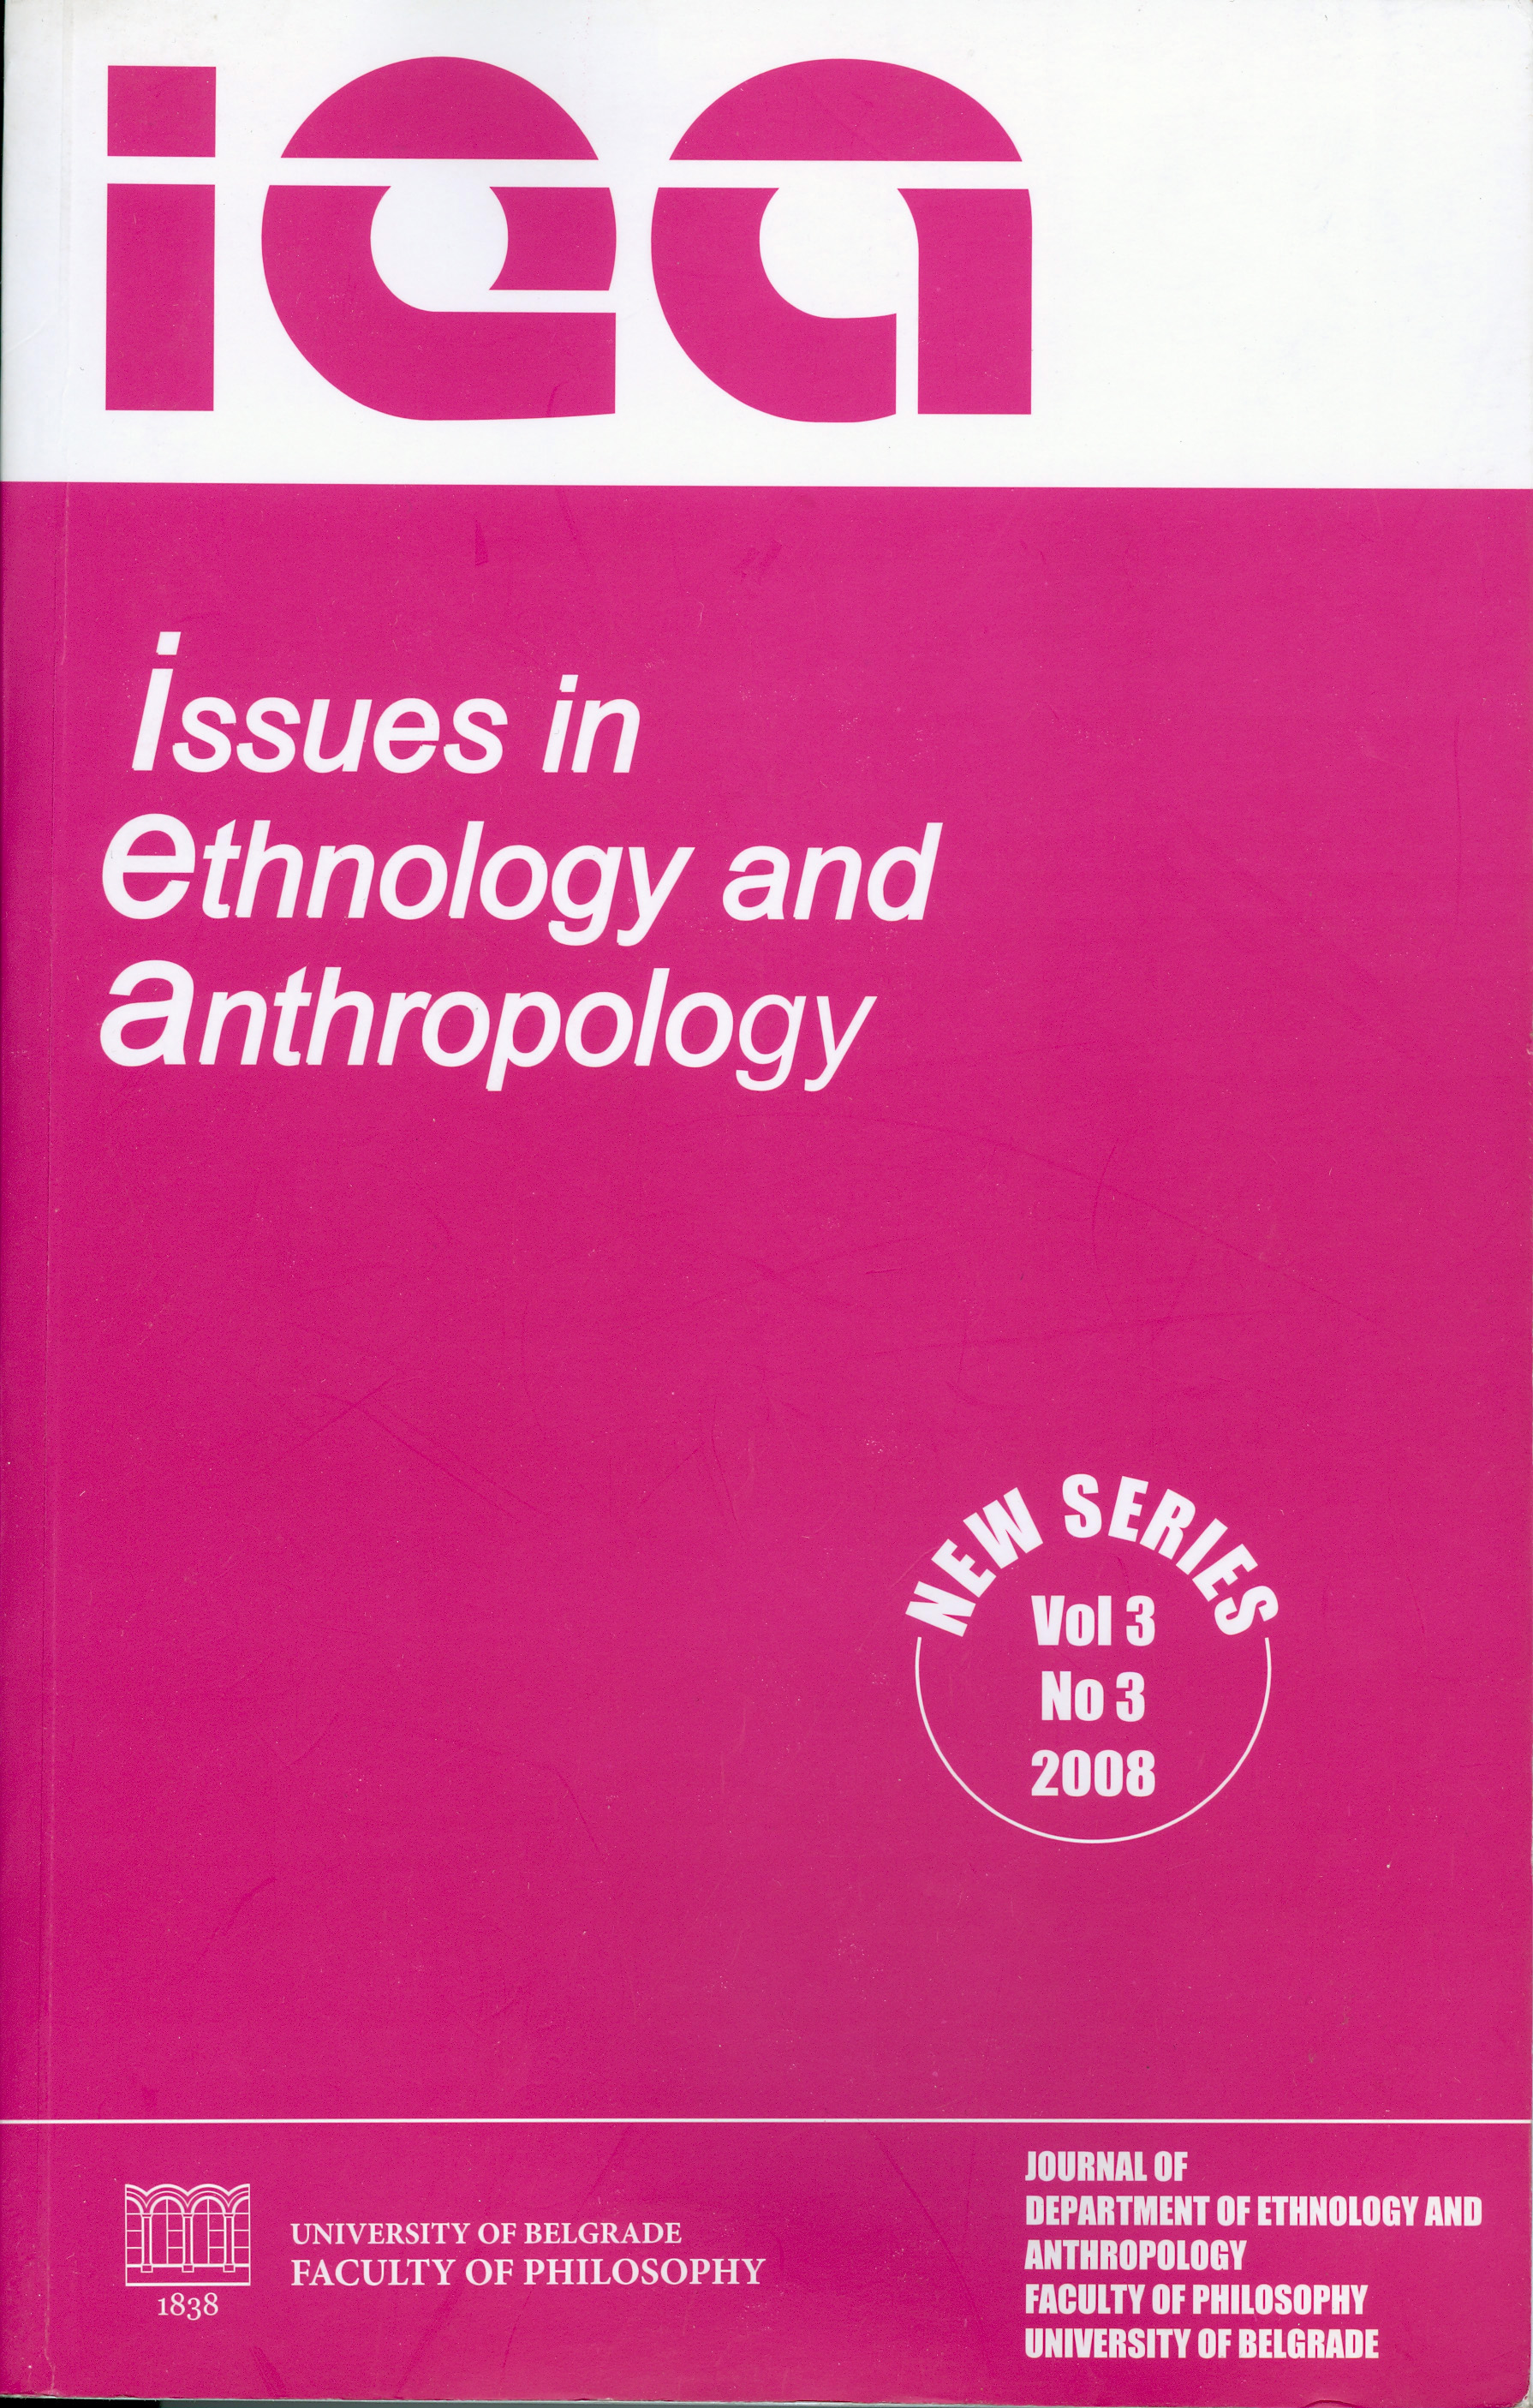 					View Vol. 3 No. 3 (2008): Issues in Ethnology and Anthropology: Thematic Issue - New Evolutionary Paradigm in Anthropology
				